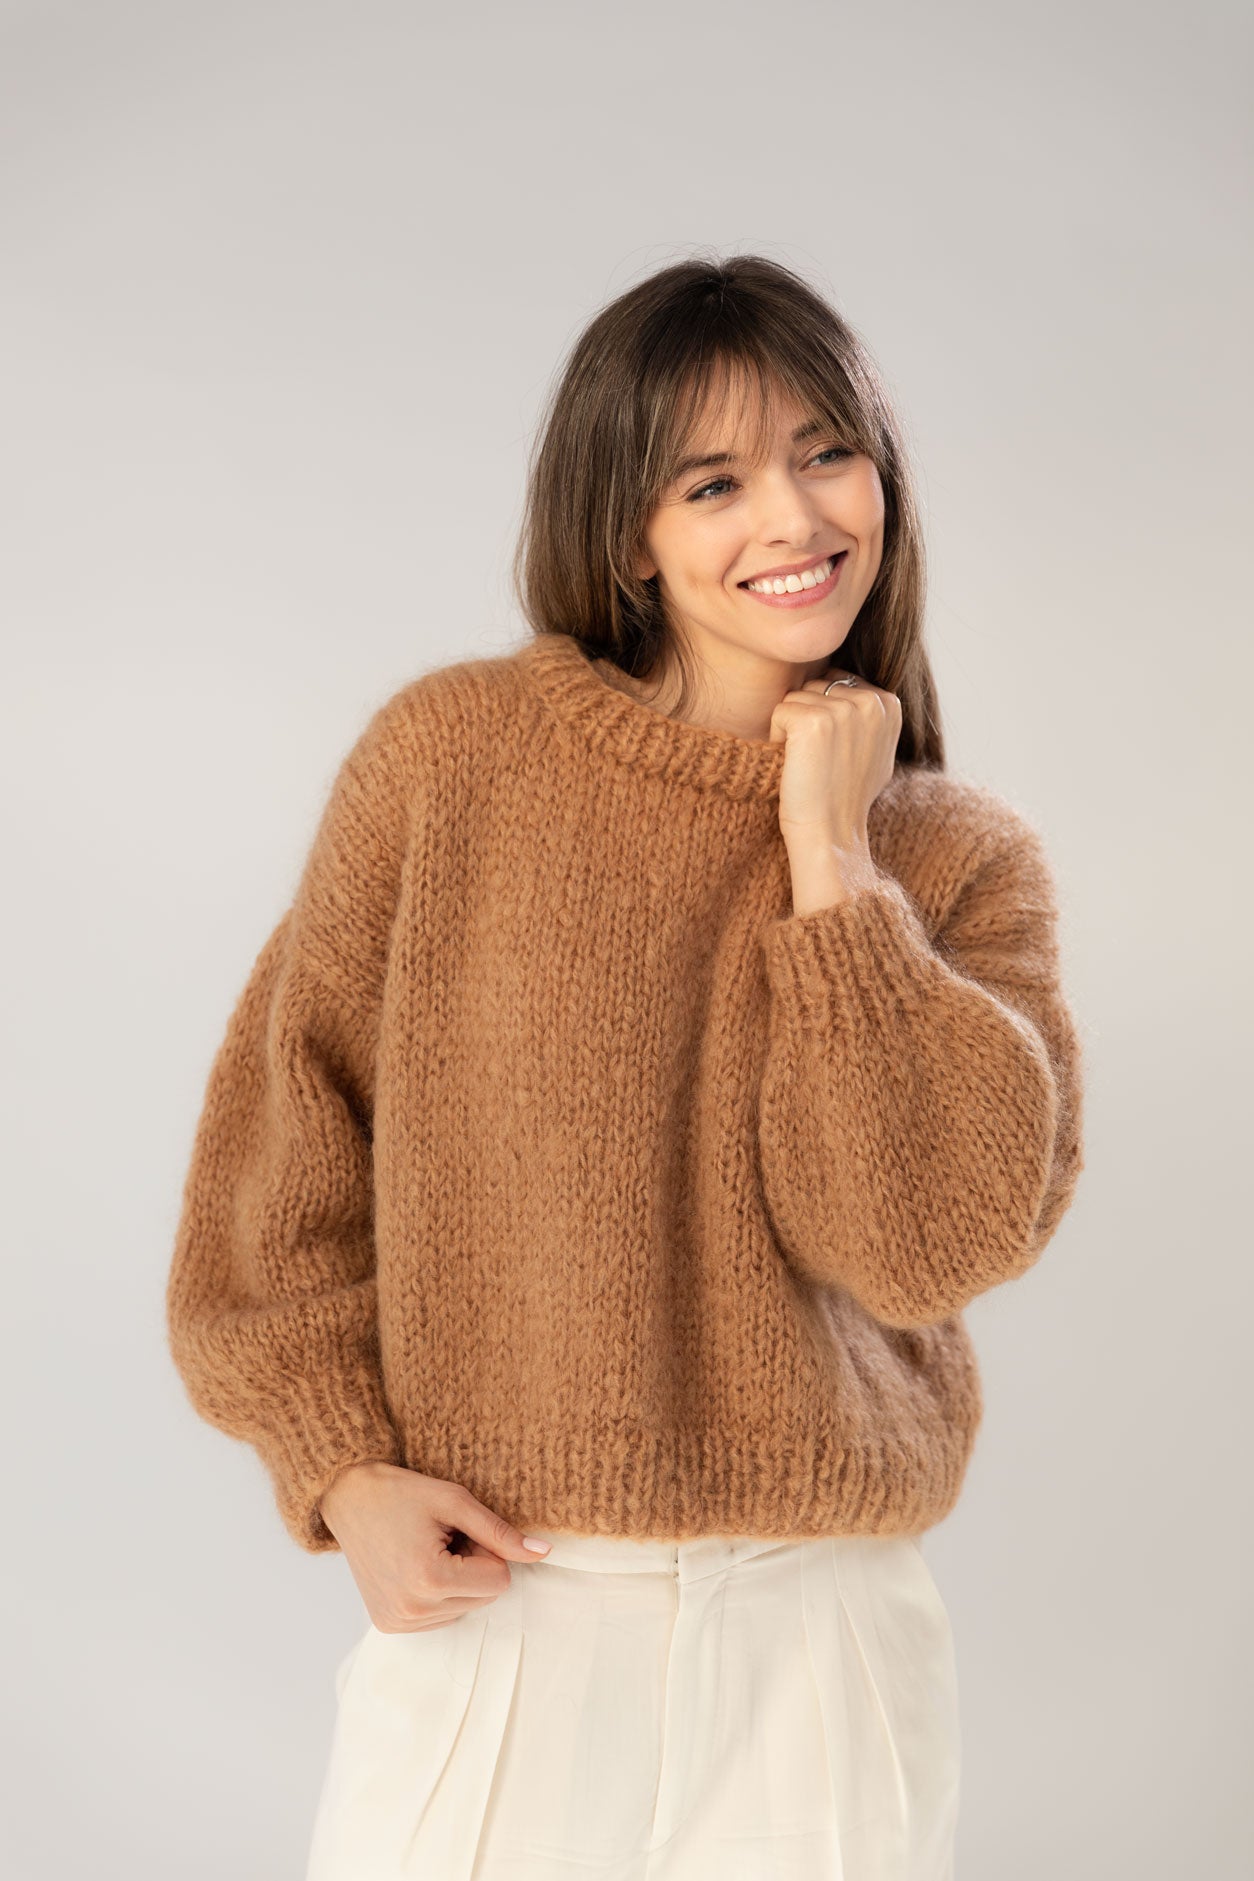 Camel mohair and organic wool sweater, oversized fit and a boxy shape.